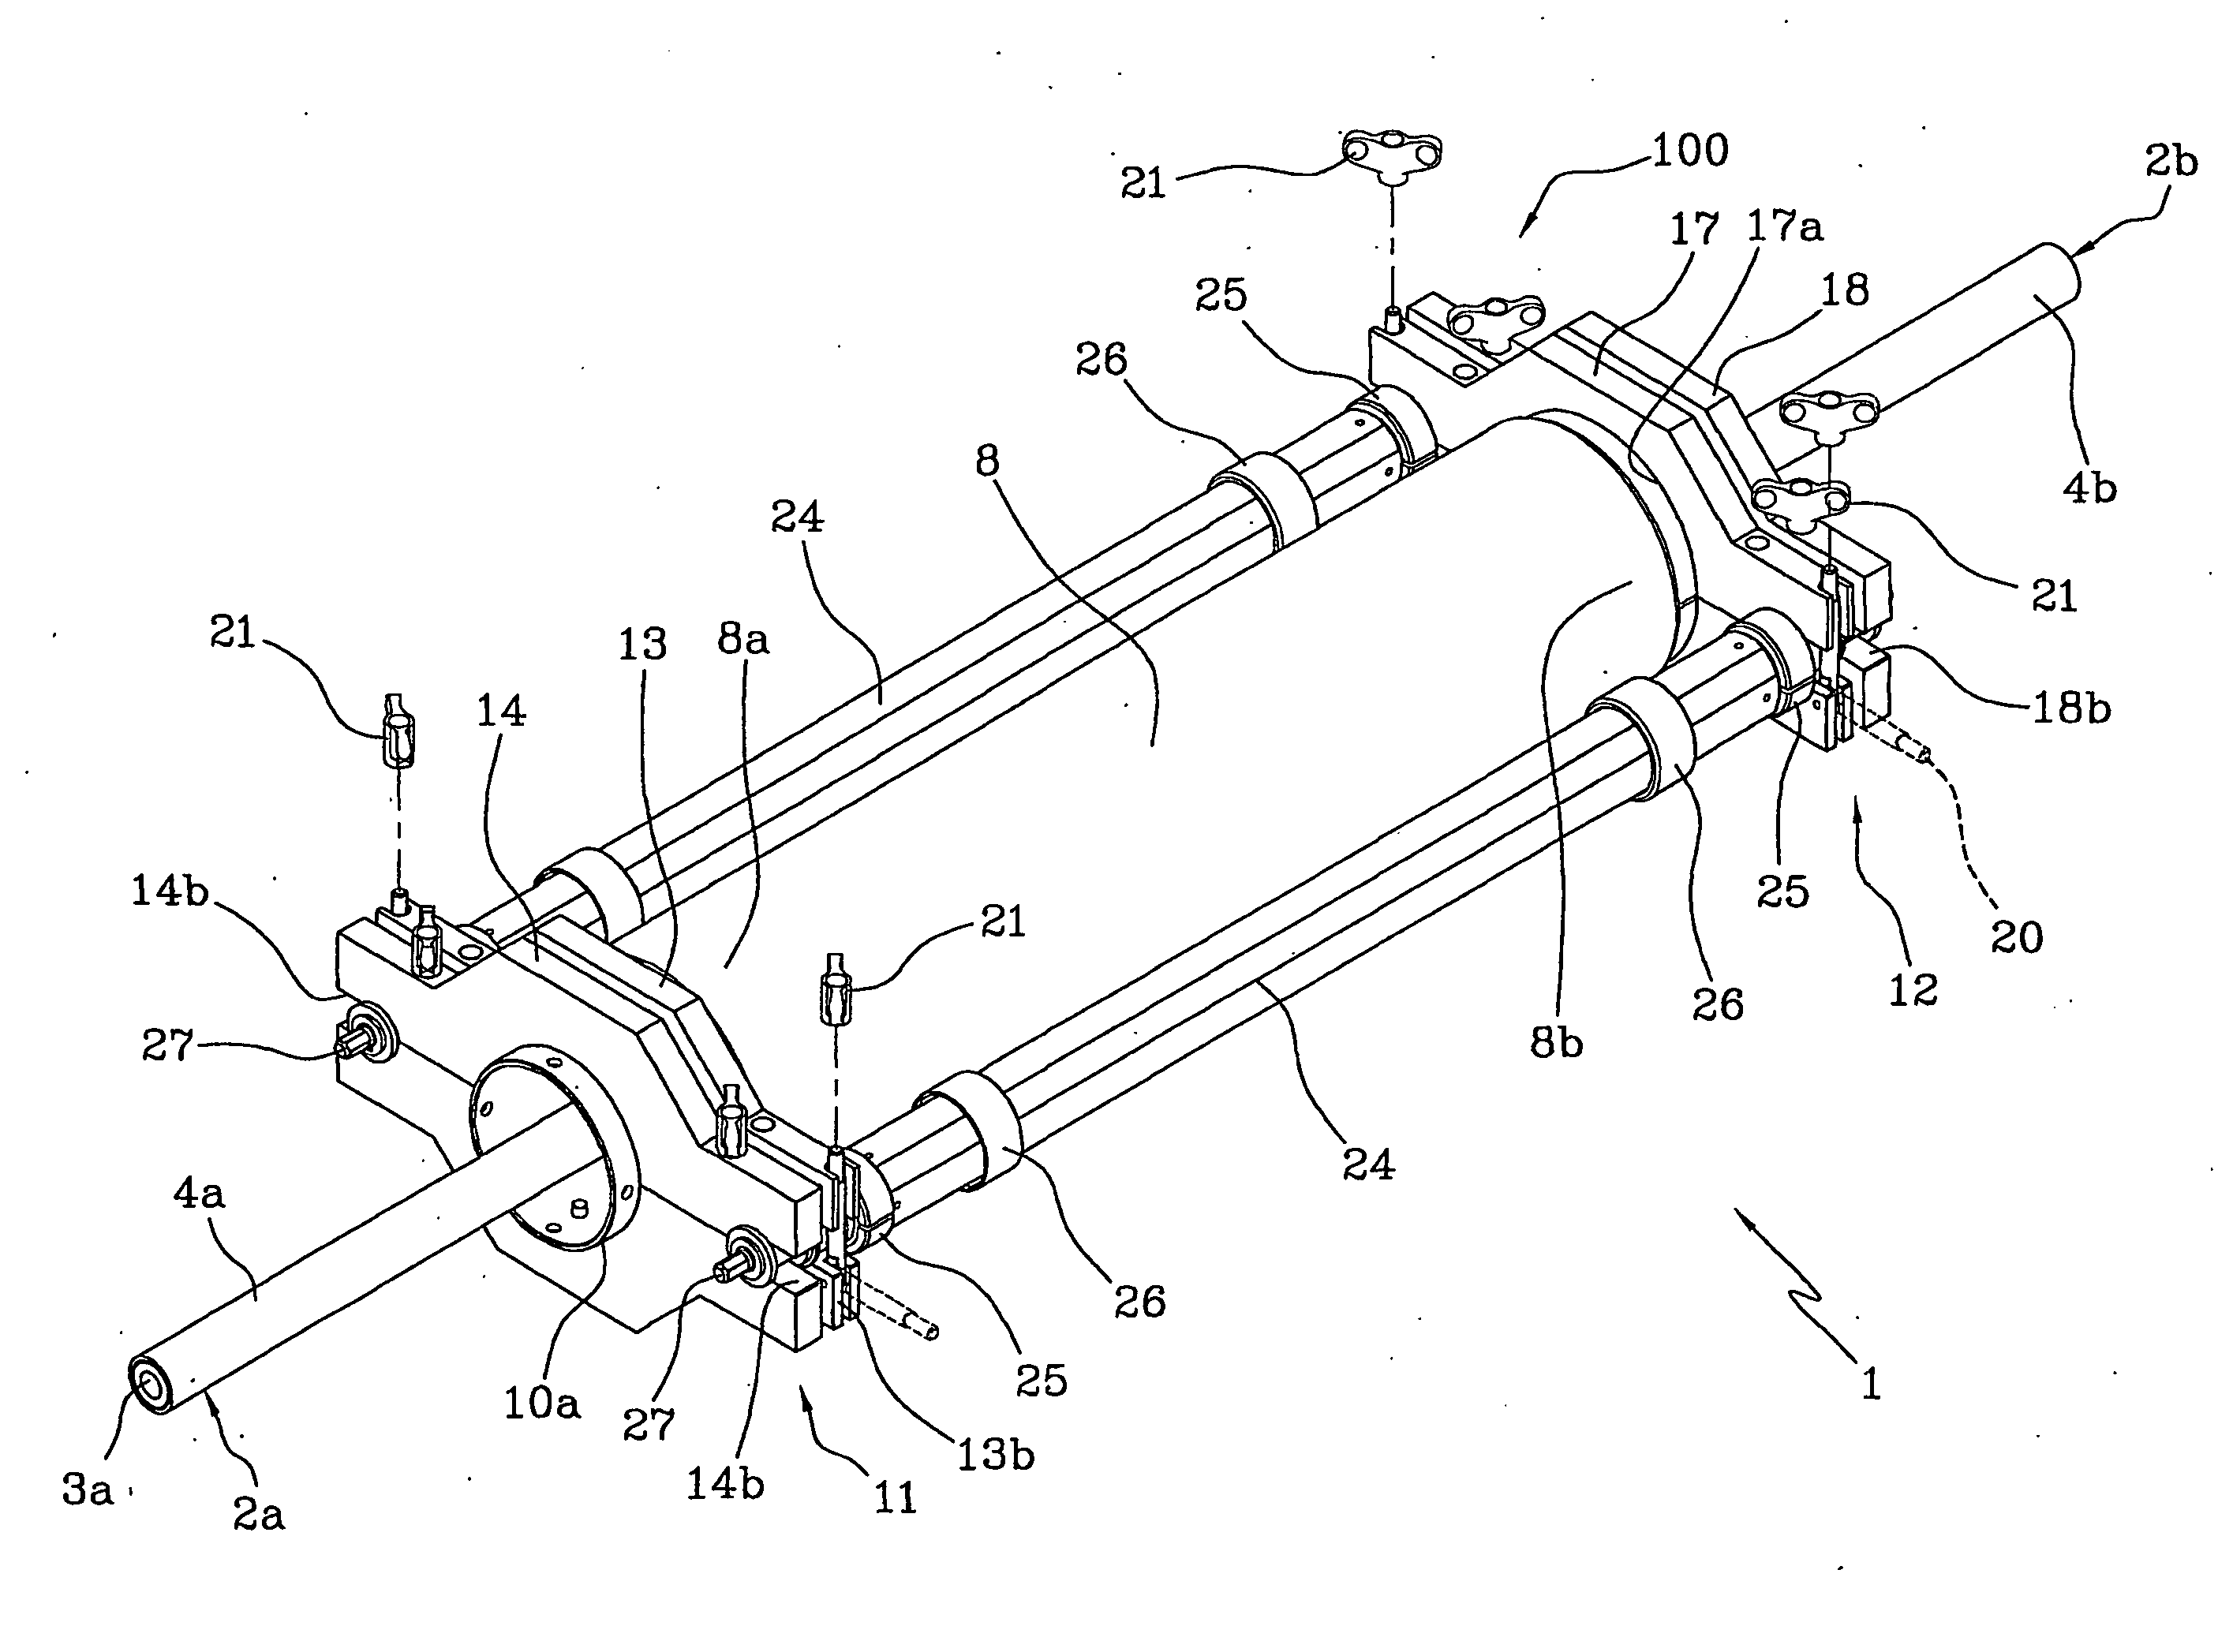 Method and Apparatus for Joining a Pair of Electric Cables